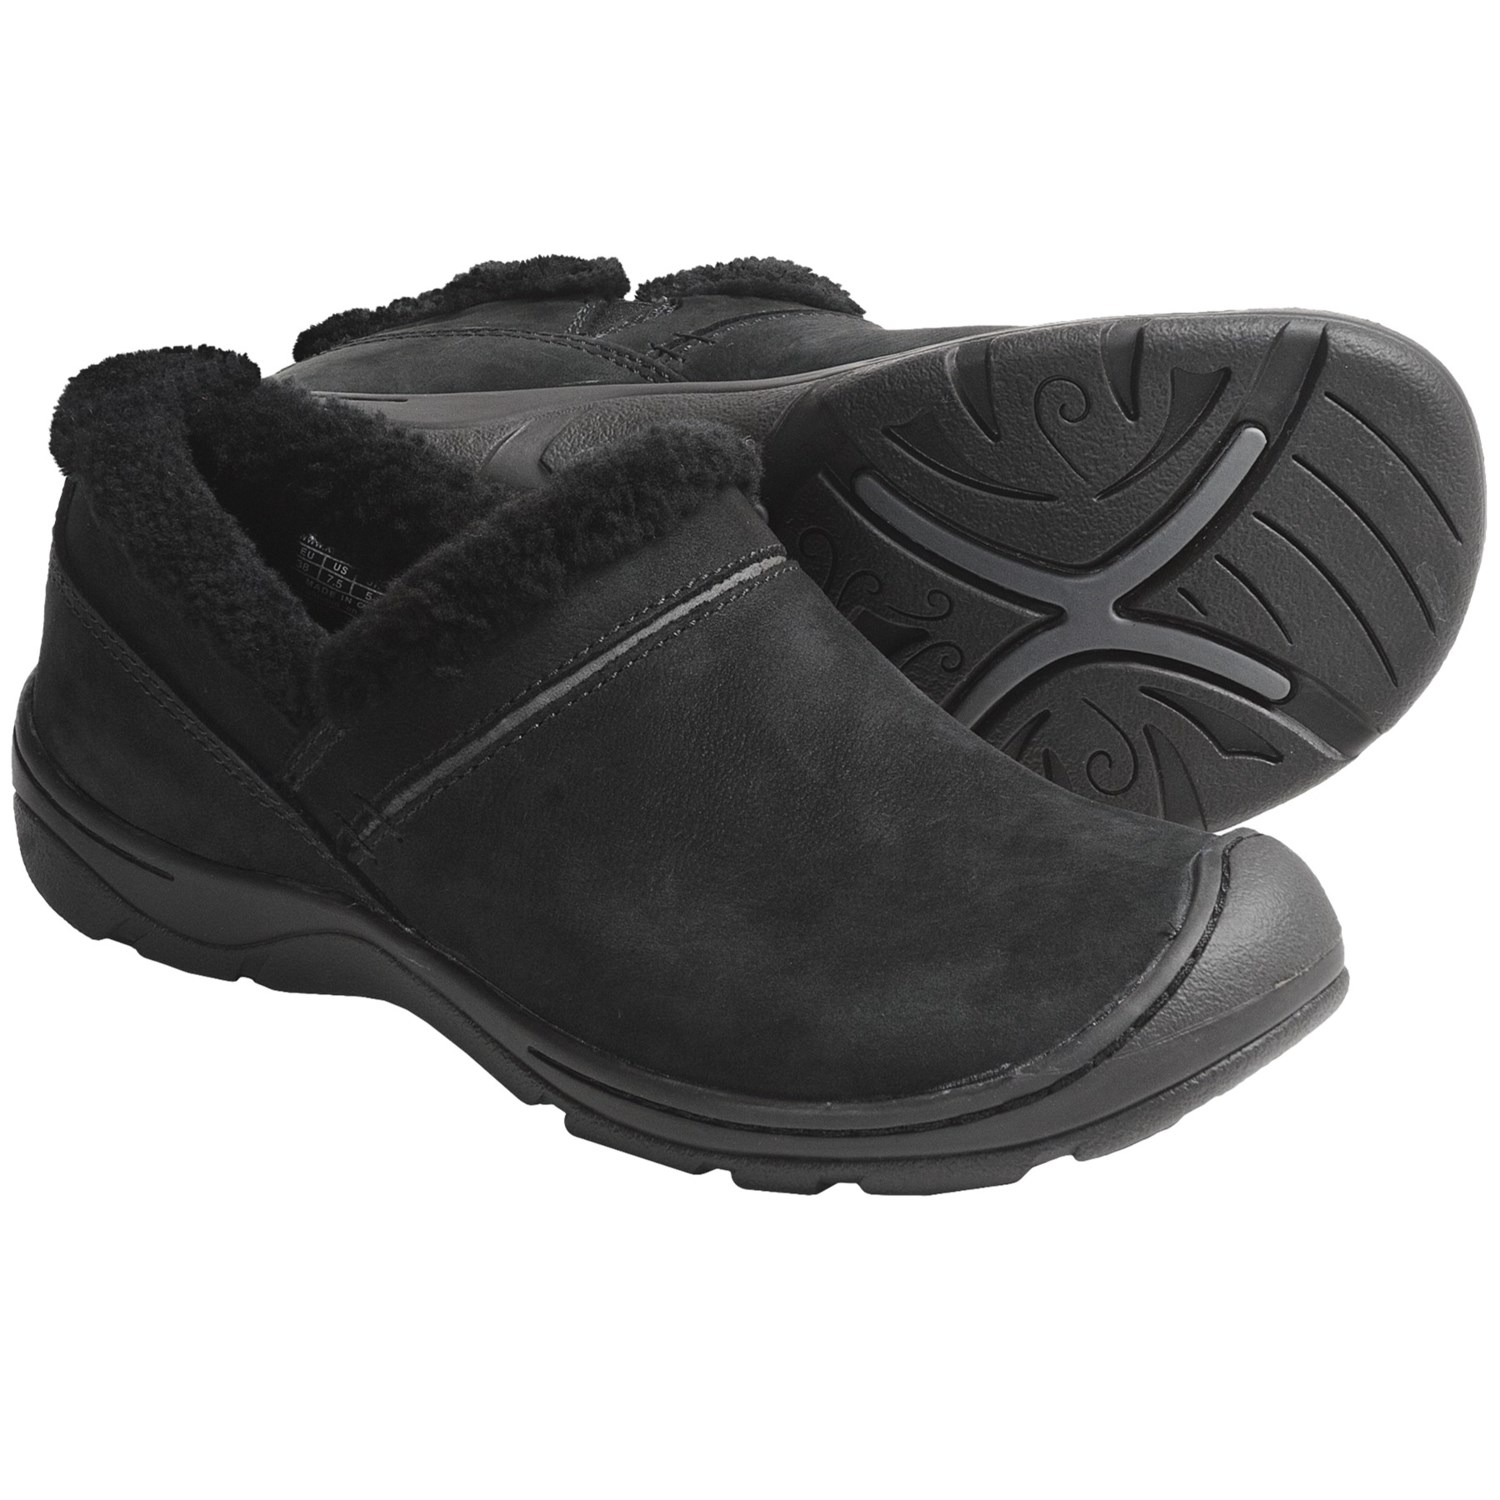 Keen Crested Butte Shoes (For Women) 4887A - Save 30%